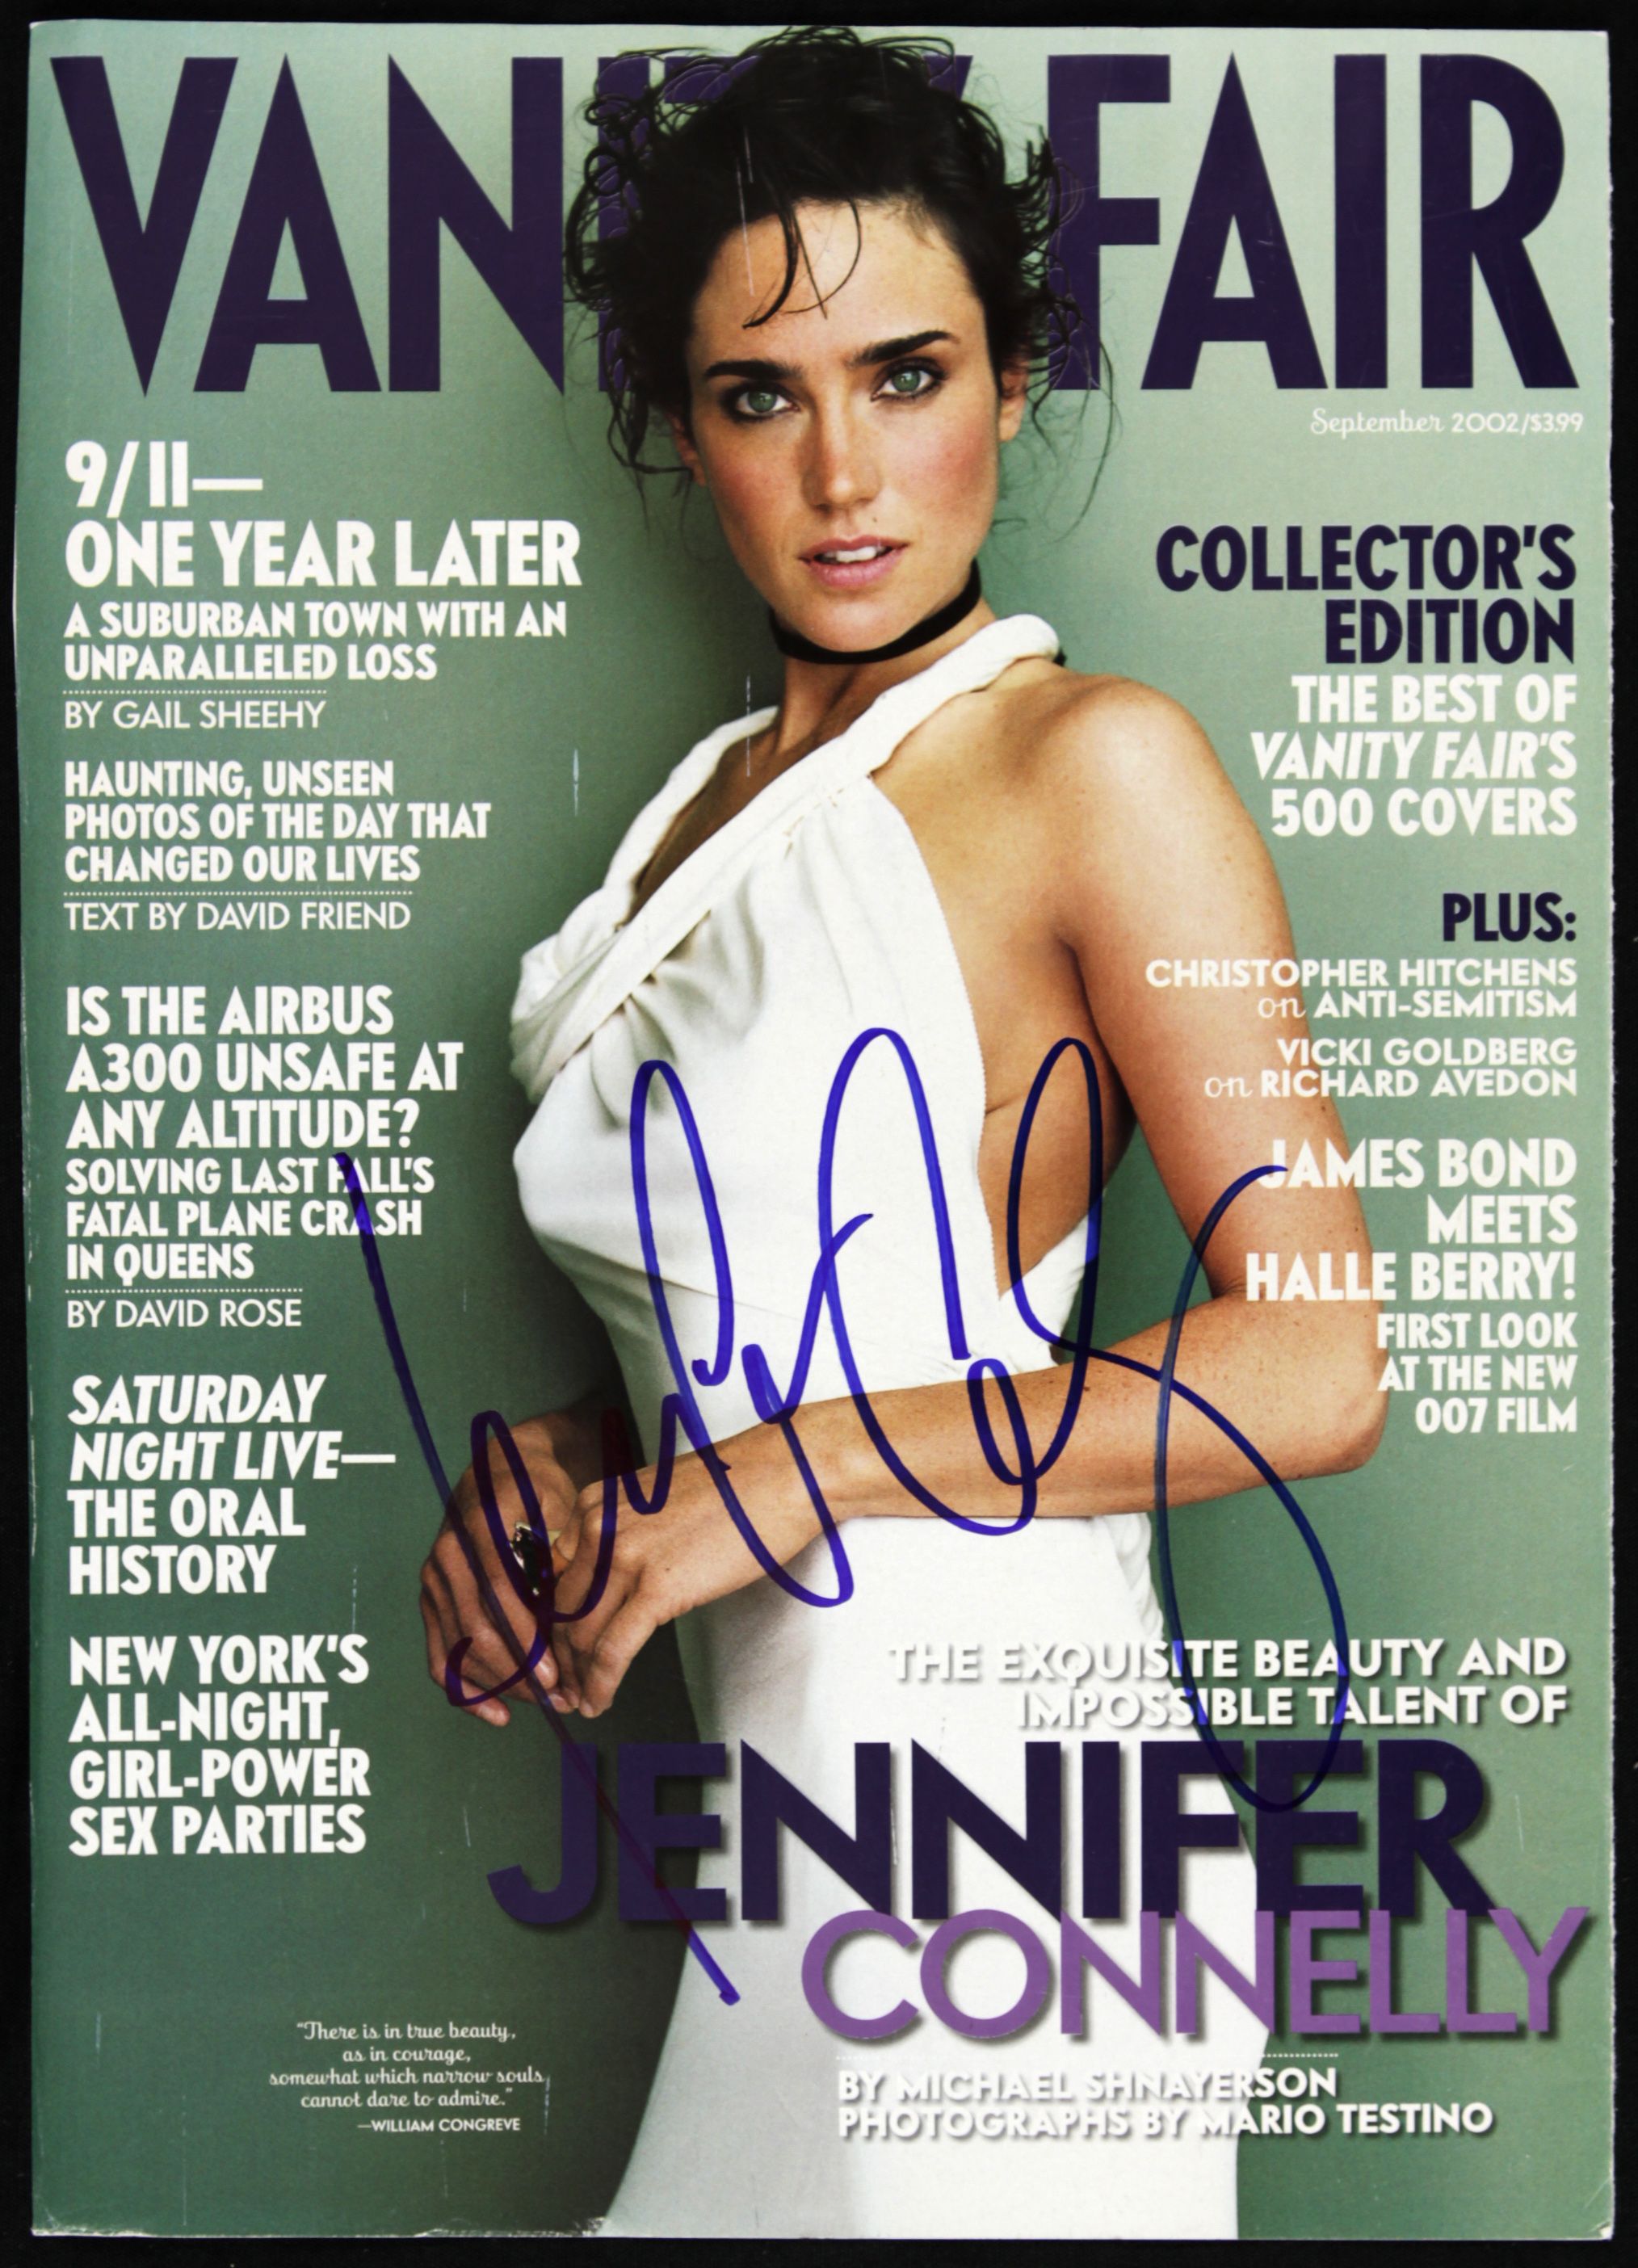 Jennifer Connelly Covers AMAZING MAGAZINE | The Inaugural Issue